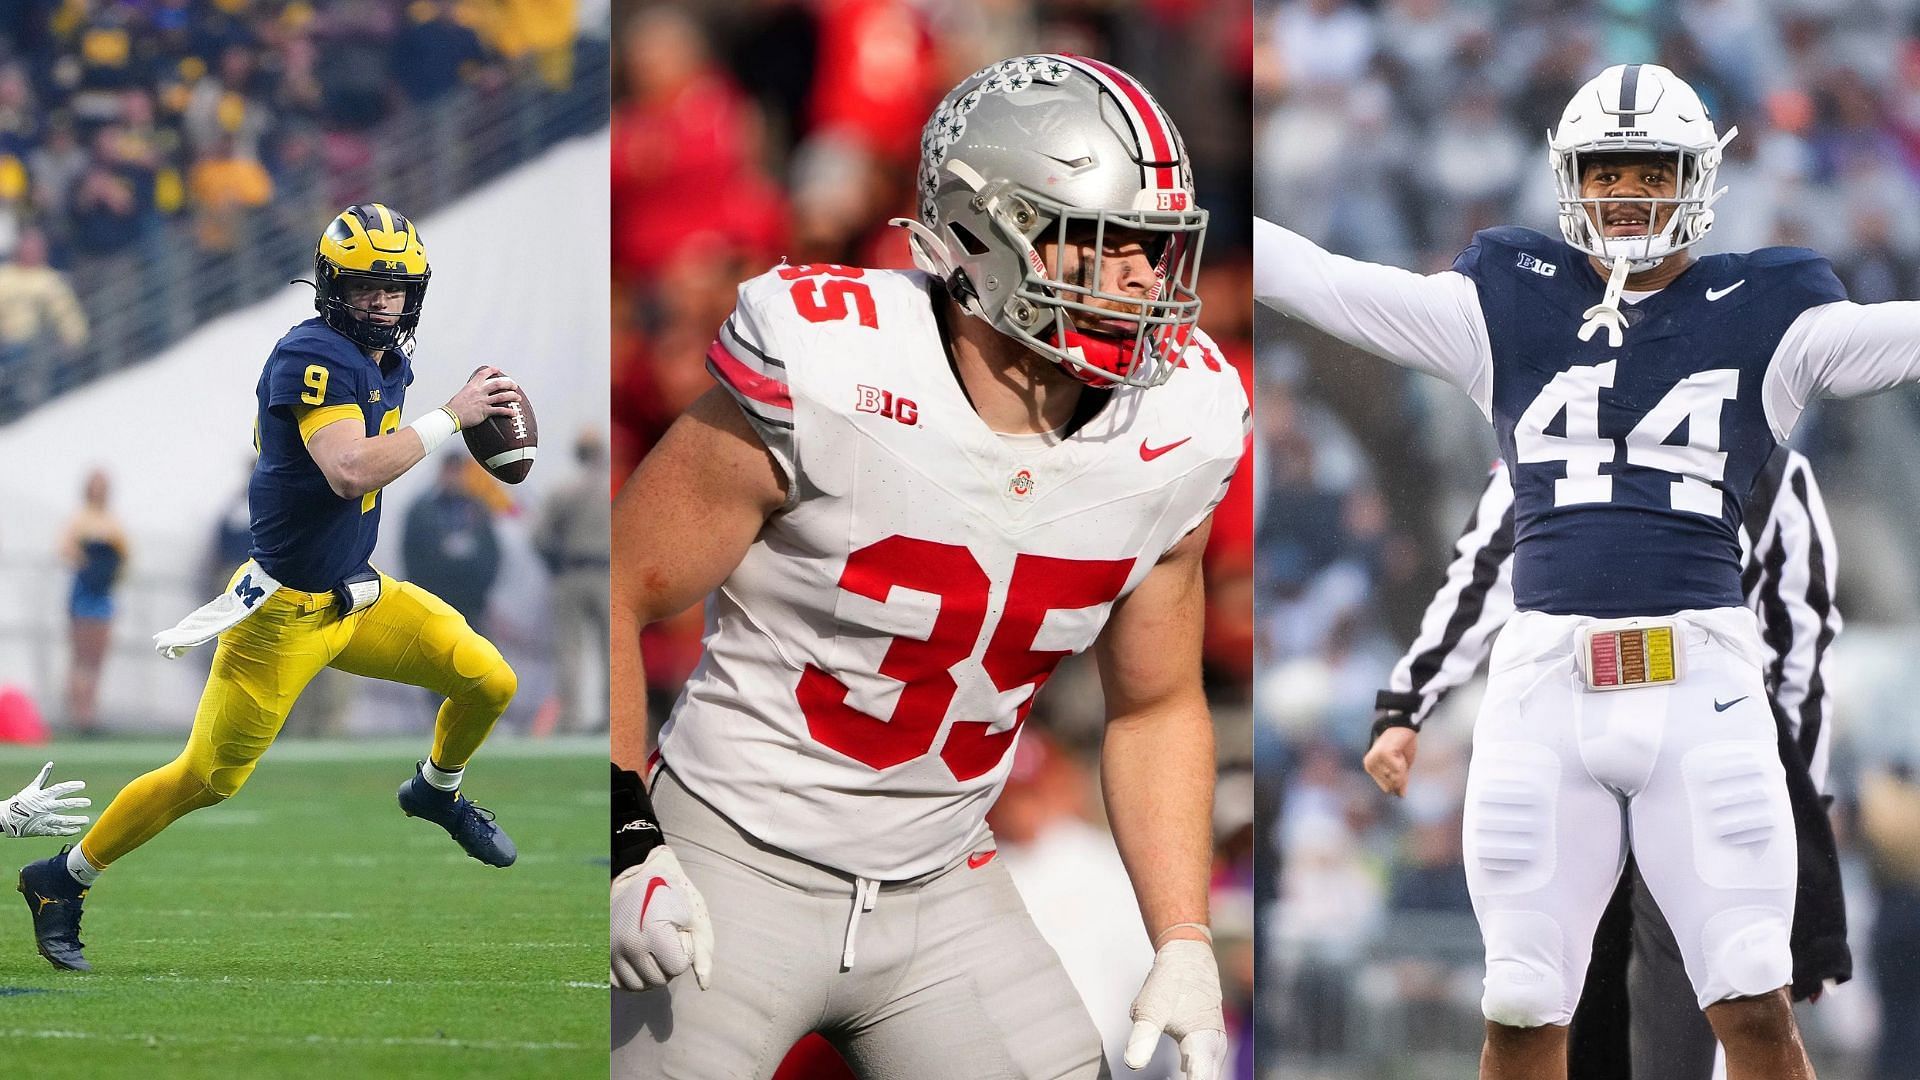 J.J. McCarthy, Tommy Eichenberg, and Demeioun Robinson (Chop) Robinson all have boom-or-bust potential in the 2024 NFL Draft